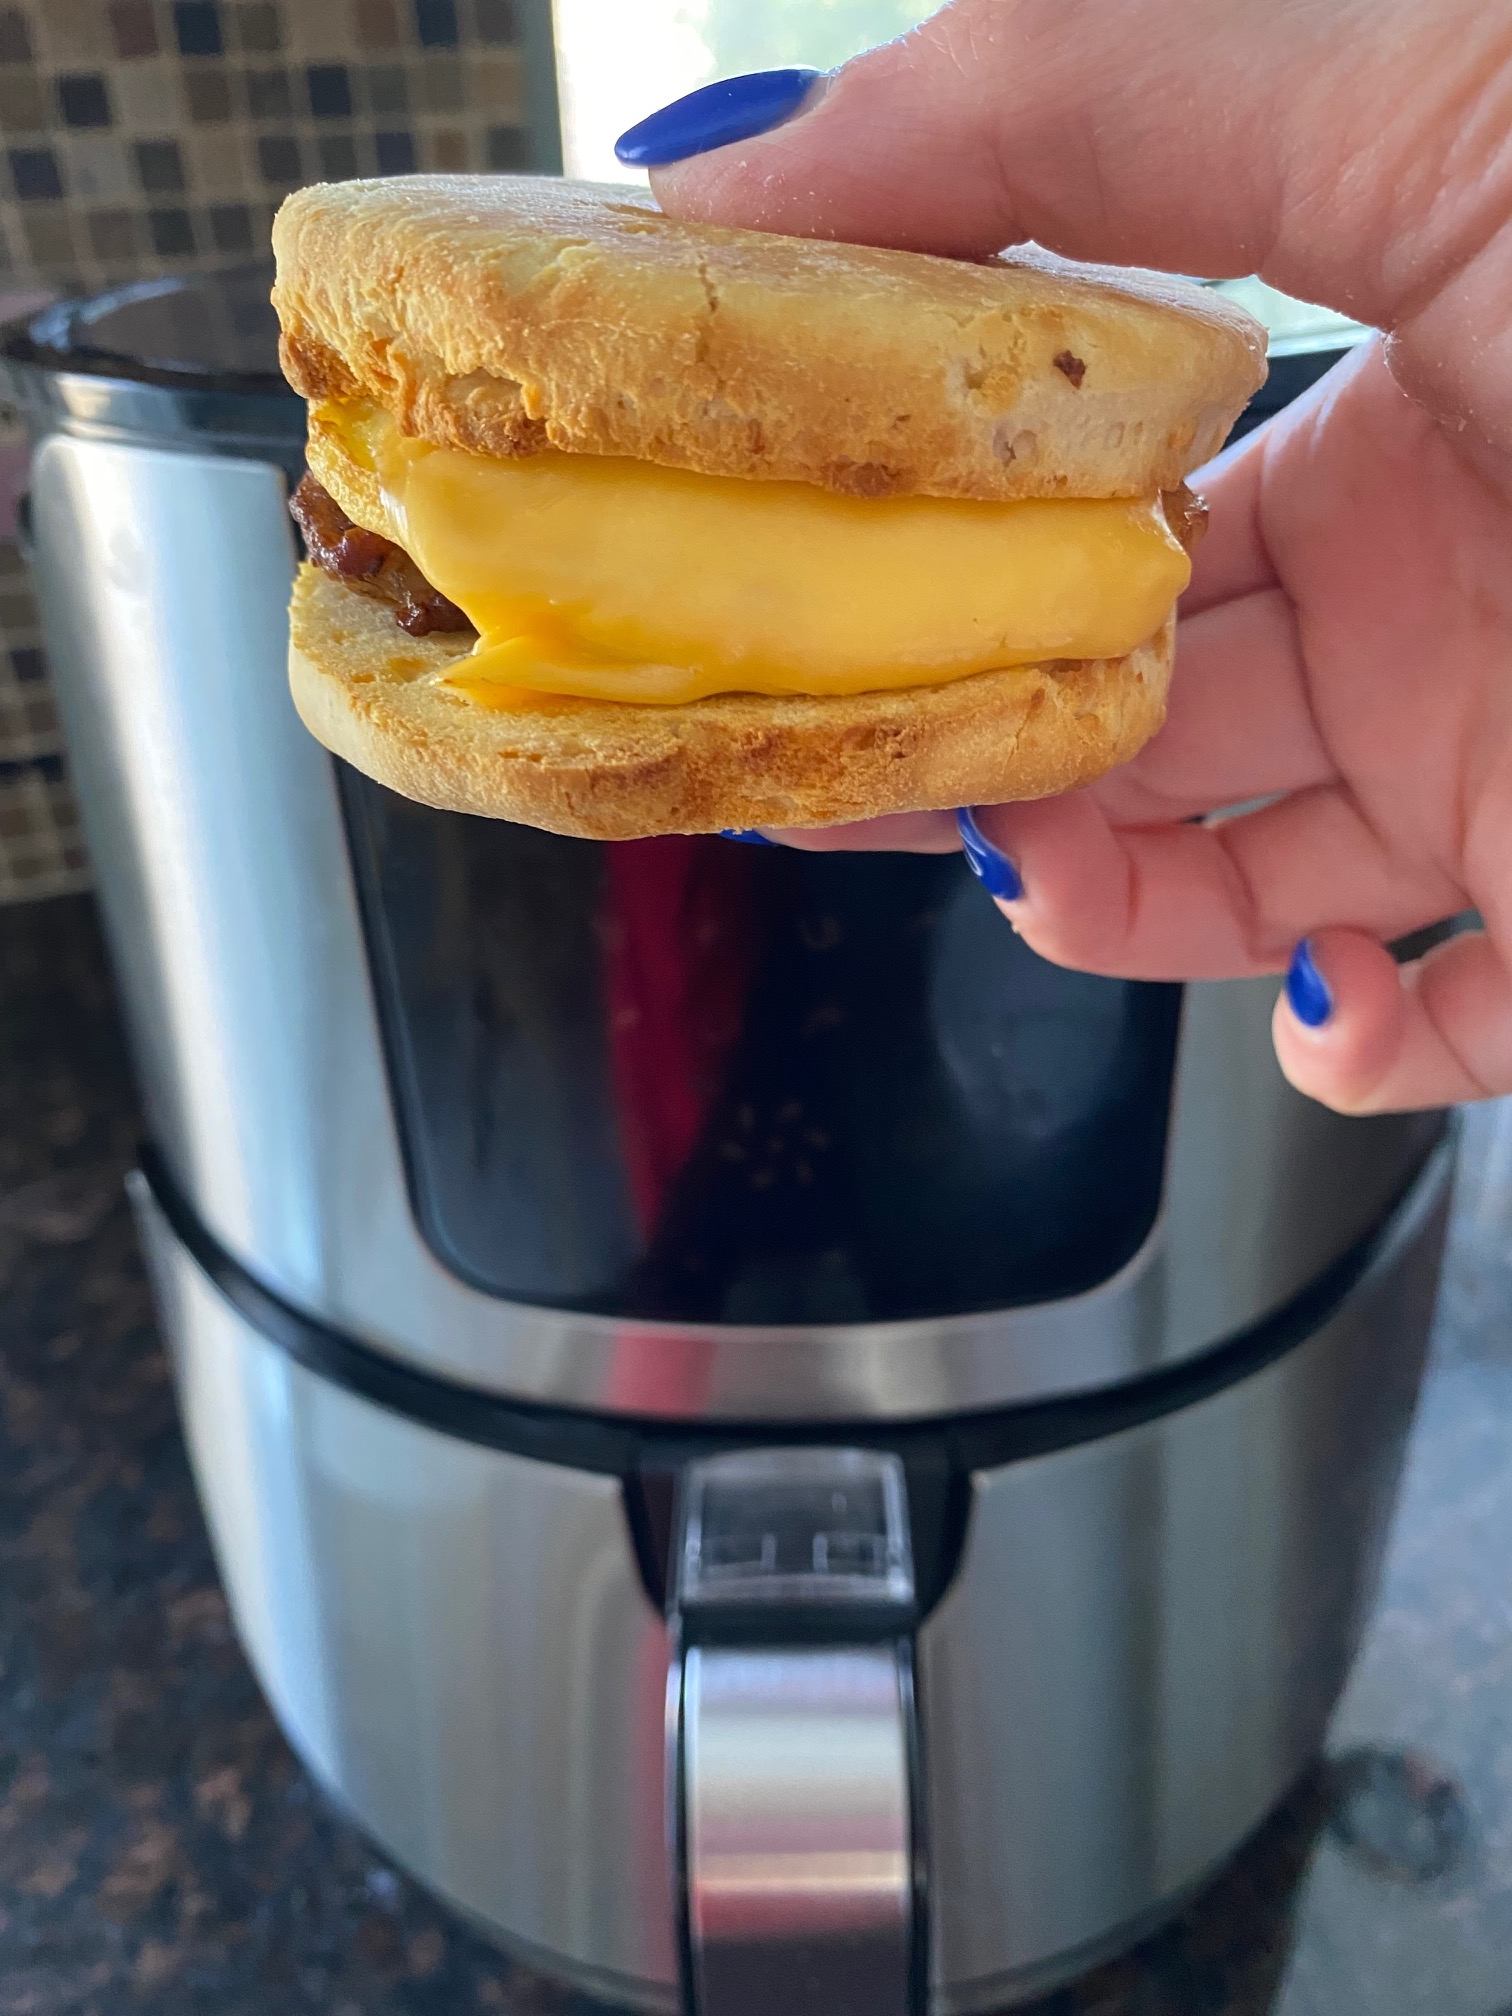 You can now get a breakfast muffin maker and it's a bargain